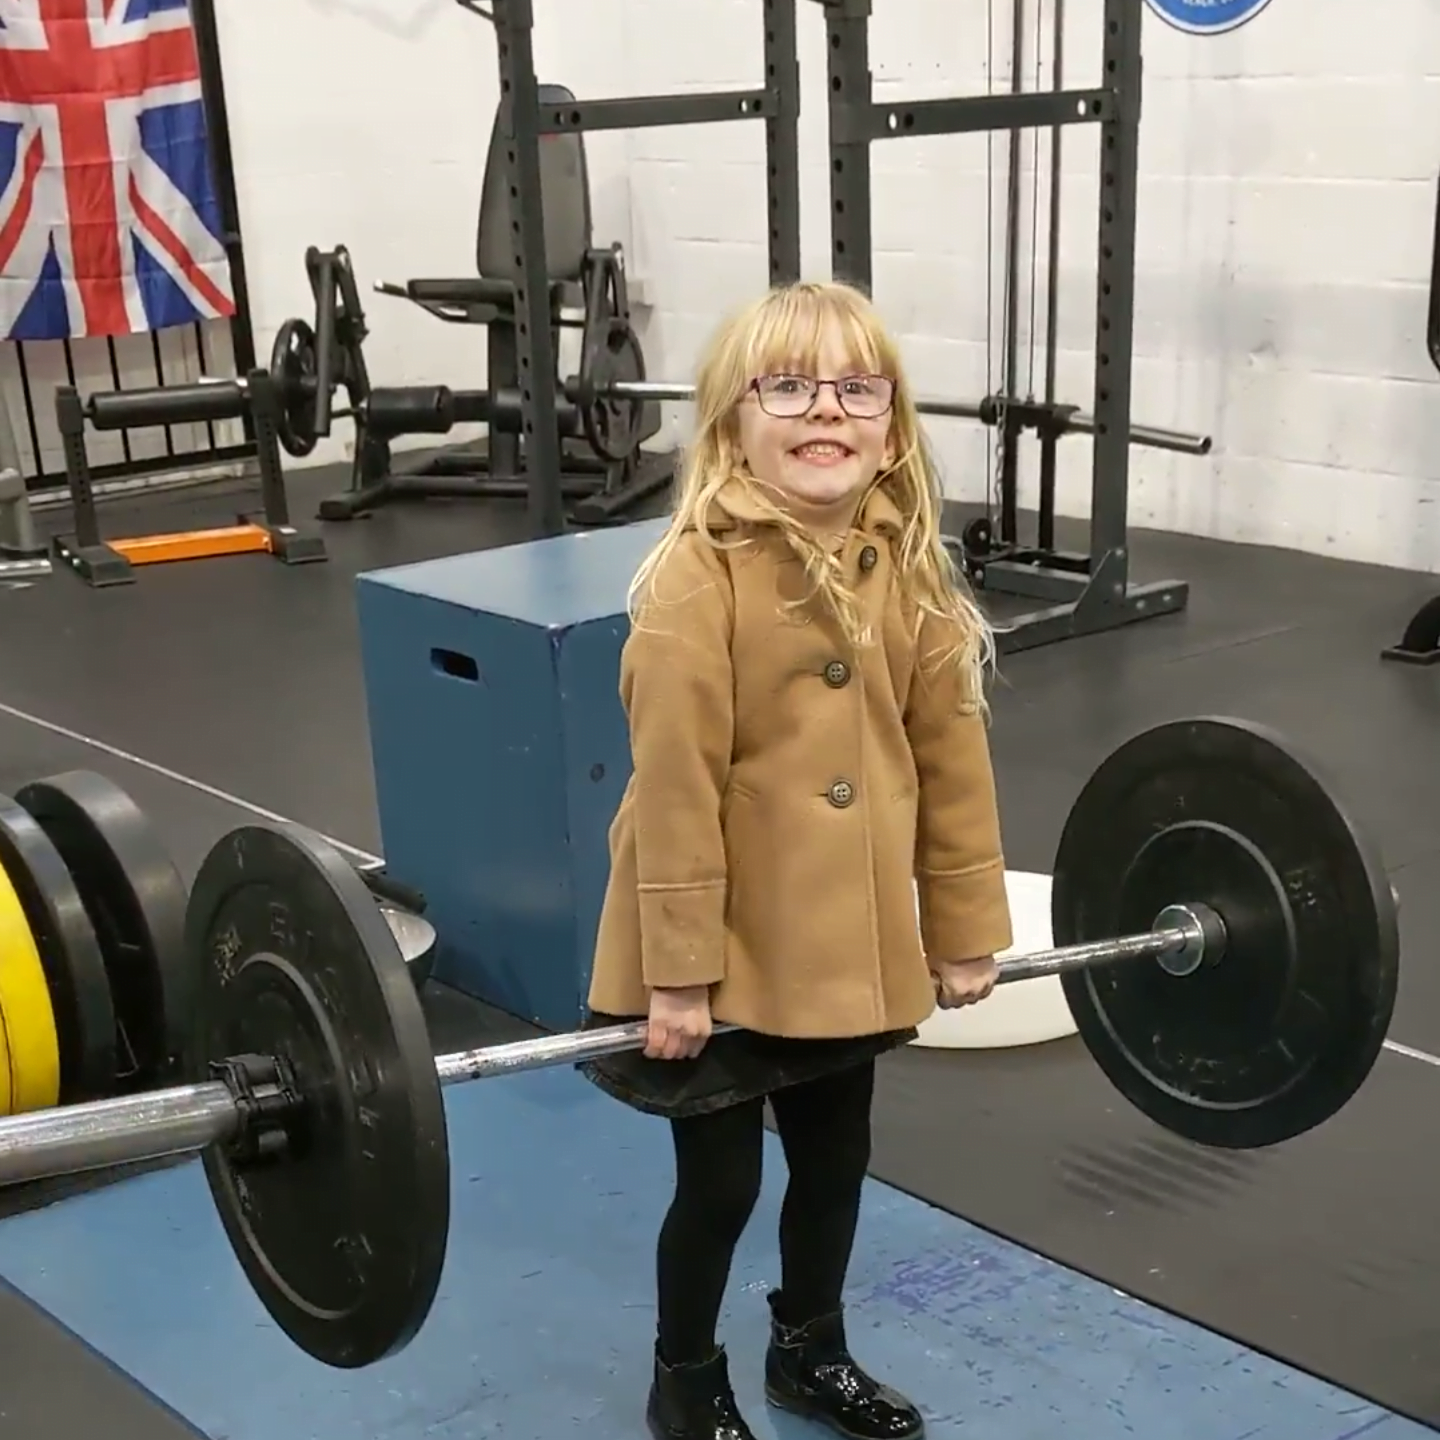 Kids can’t do weight training, surely…?